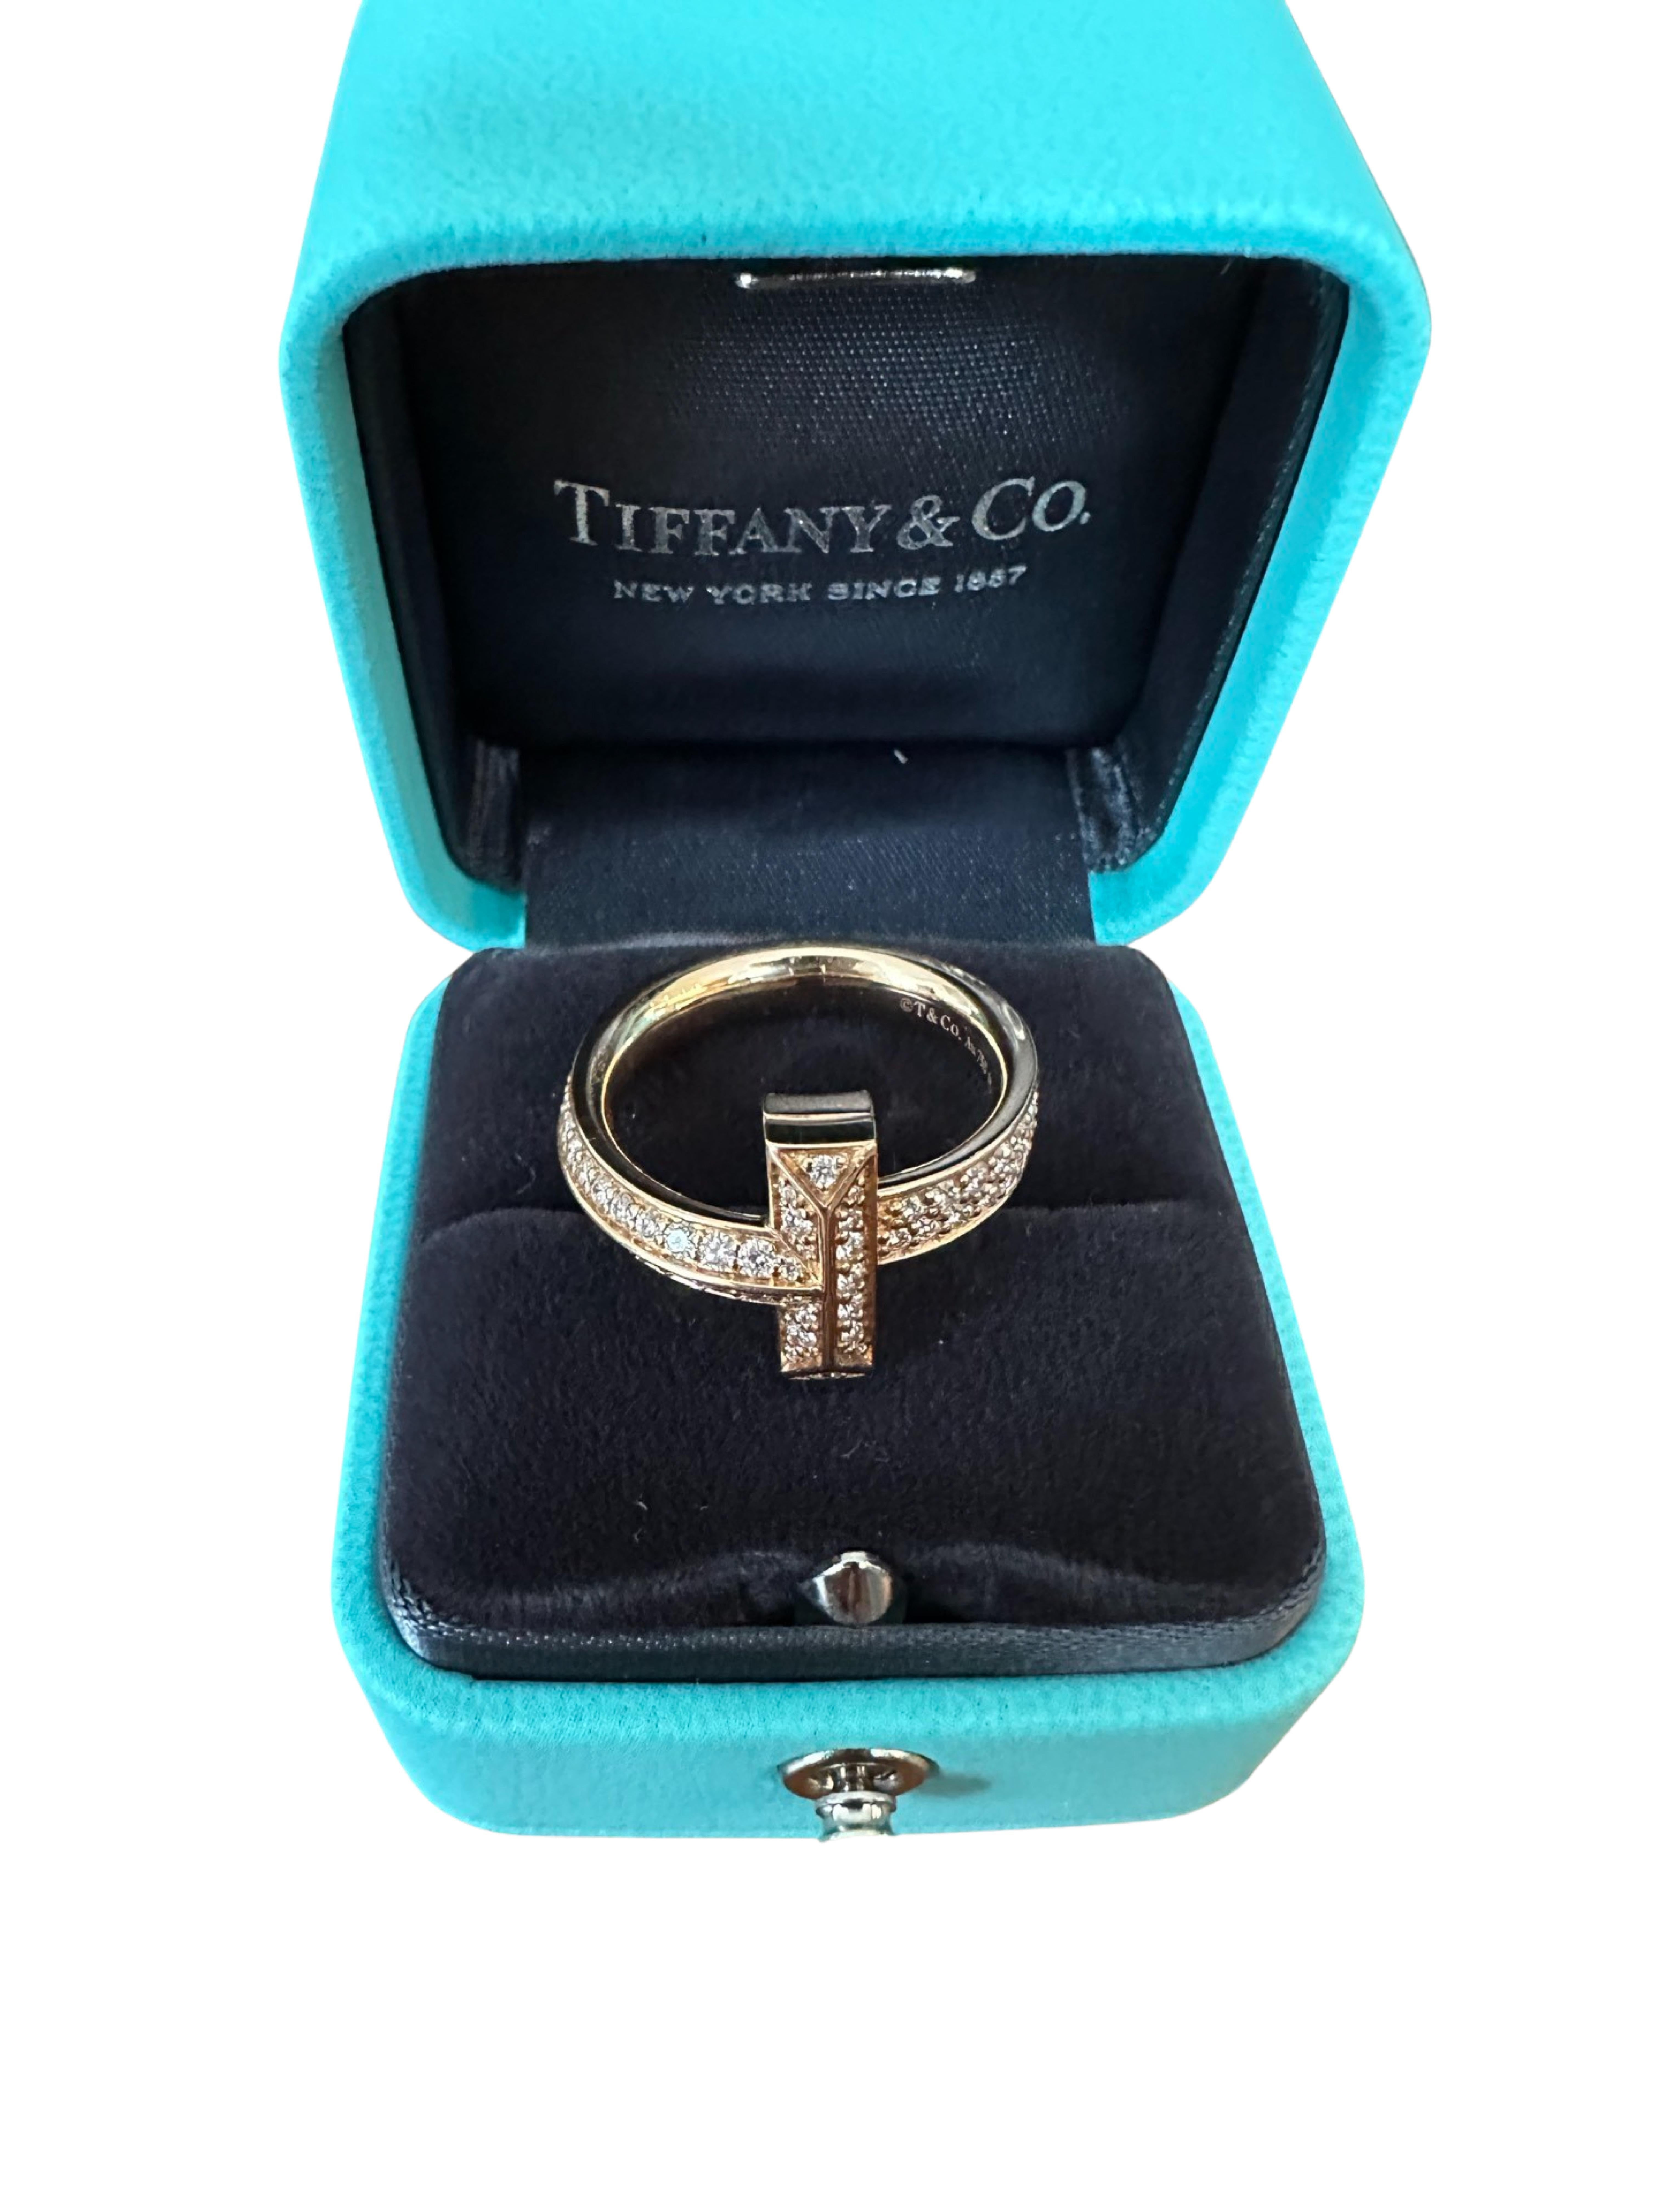 Tiffany Co T T1 ring with 18k rose gold with 0.55 ctw brilliant cut diamonds 
Ring size : 6.75 
Comes within the original box 
Never been resized, polished once only 
Retail value is over $7000